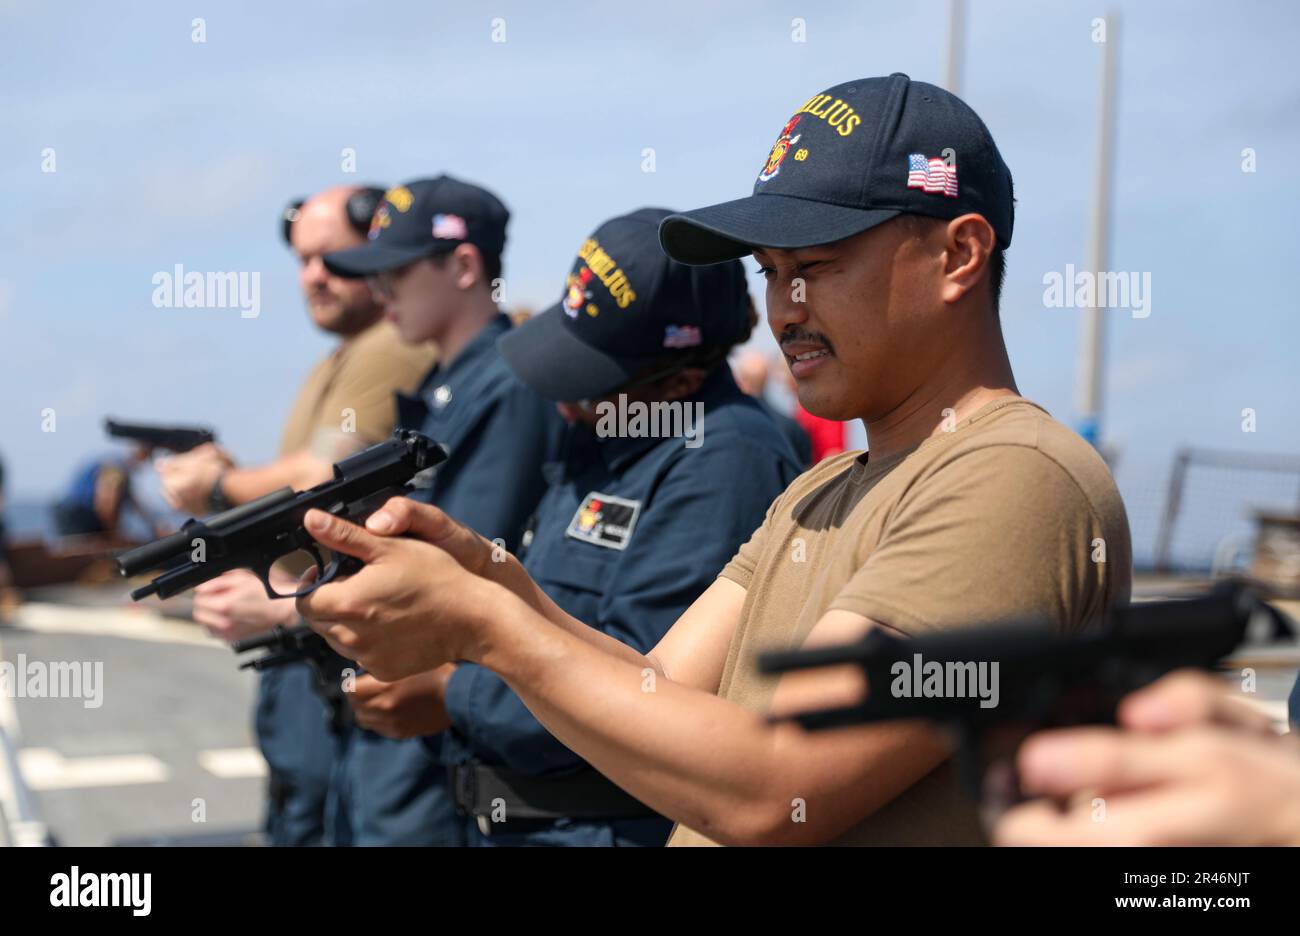 SOUTH CHINA SEA (March 27, 2023) – Retail Sales Specialist 3rd Class Amador Capuno, from XXXXX, XXXXXXX, inspects a 9 mm pistol during weapons familiarization training aboard the Arleigh Burke-class guided-missile destroyer USS Milius (DDG 69) while operating in the South China Sea, March 27. Milius is assigned to Commander, Task Force 71/Destroyer Squadron (DESRON) 15, the Navy’s largest forward-deployed DESRON and the U.S. 7th Fleet’s principal surface force. Stock Photo